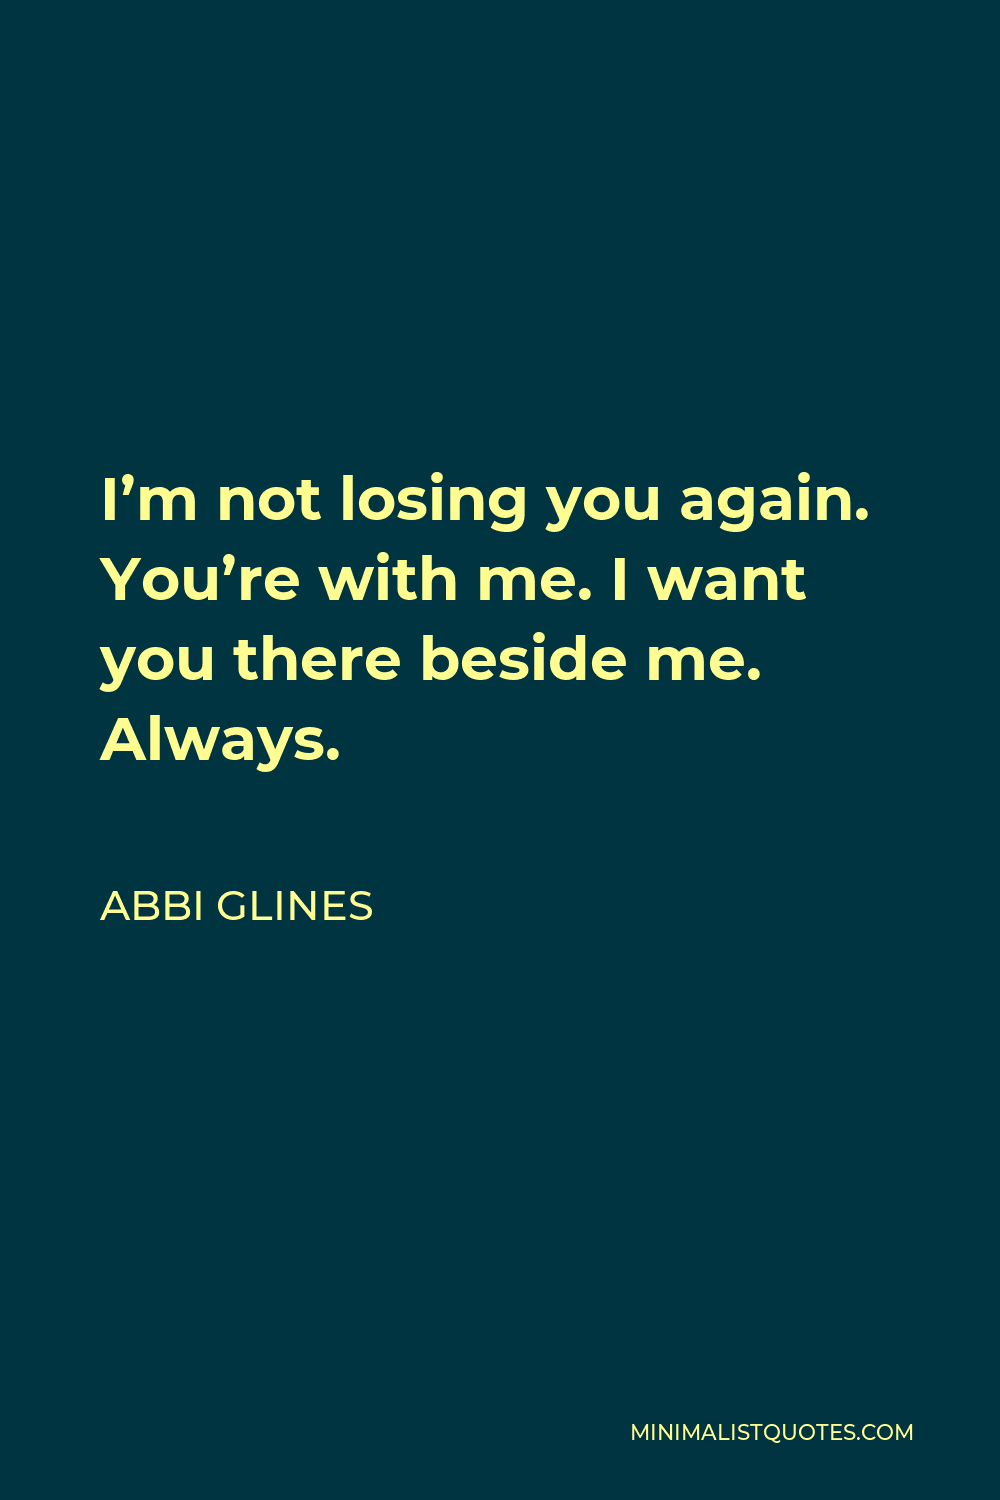 Abbi Glines Quote - I’m not losing you again. You’re with me. I want you there beside me. Always.